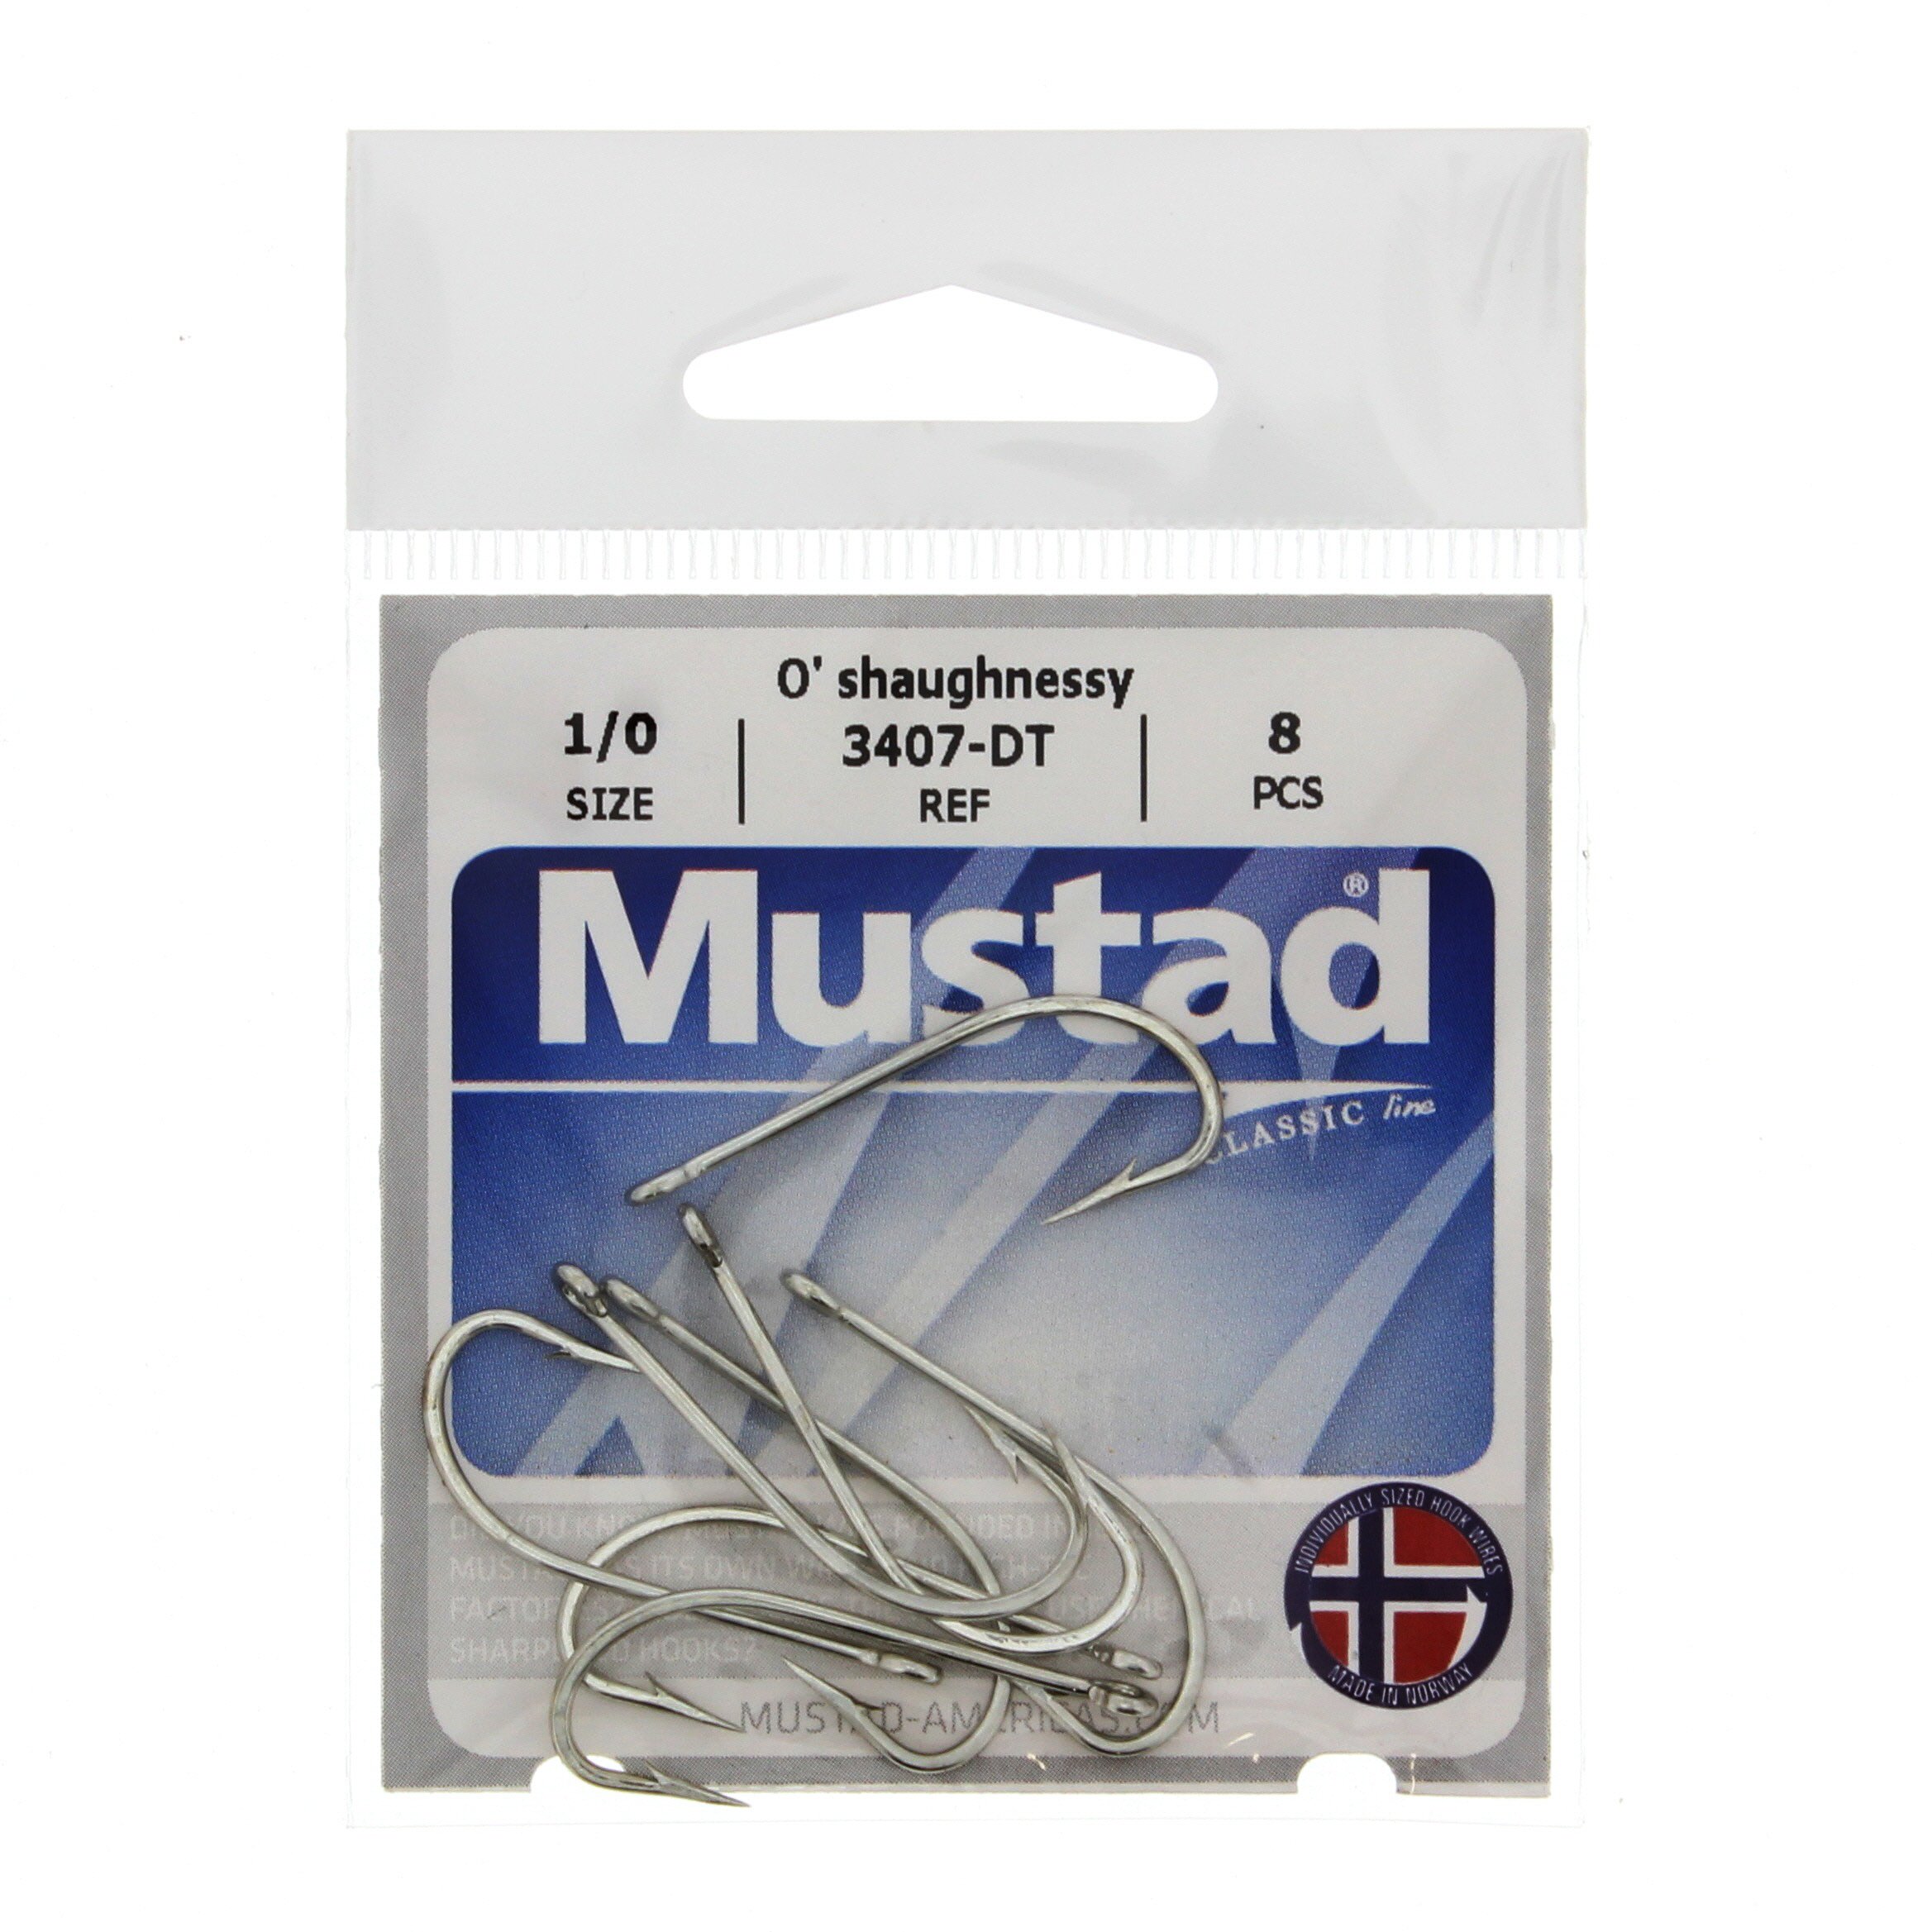 Mustad 3407-DT O'shaughnessy Hooks, Size 1/0